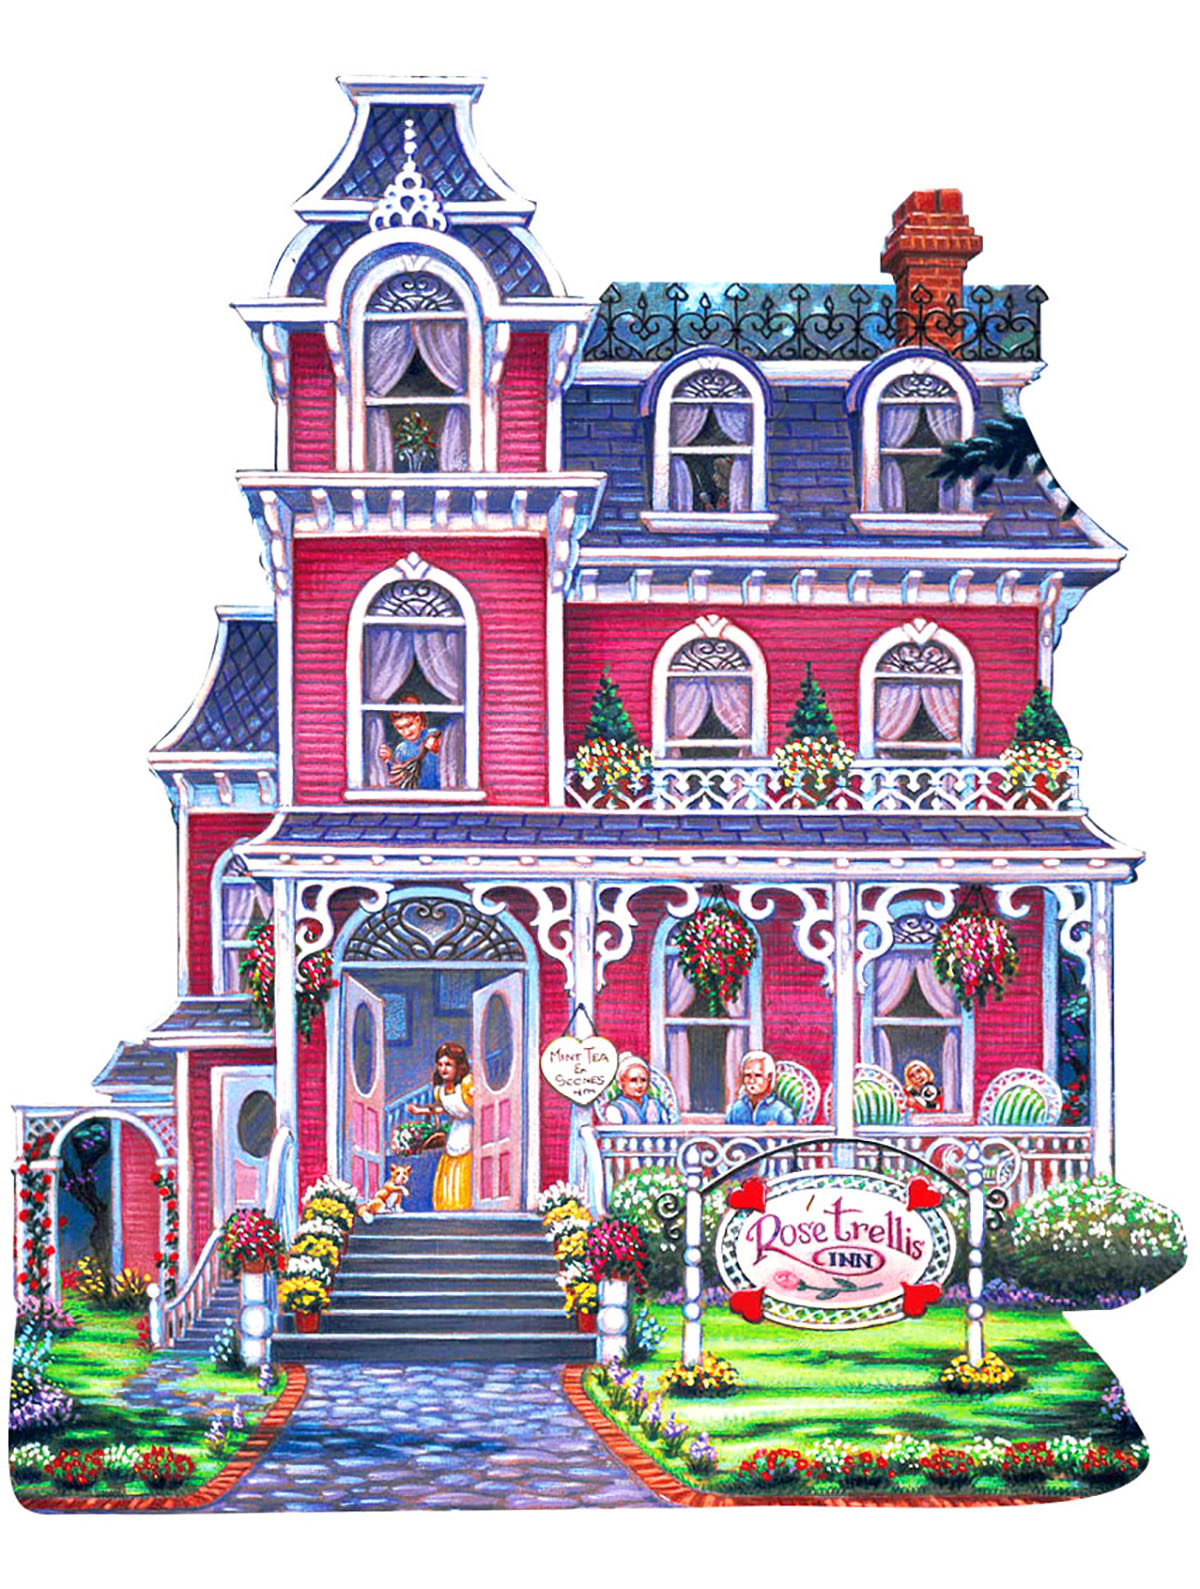 Breakfast in Bed Around the House Jigsaw Puzzle By New York Puzzle Co